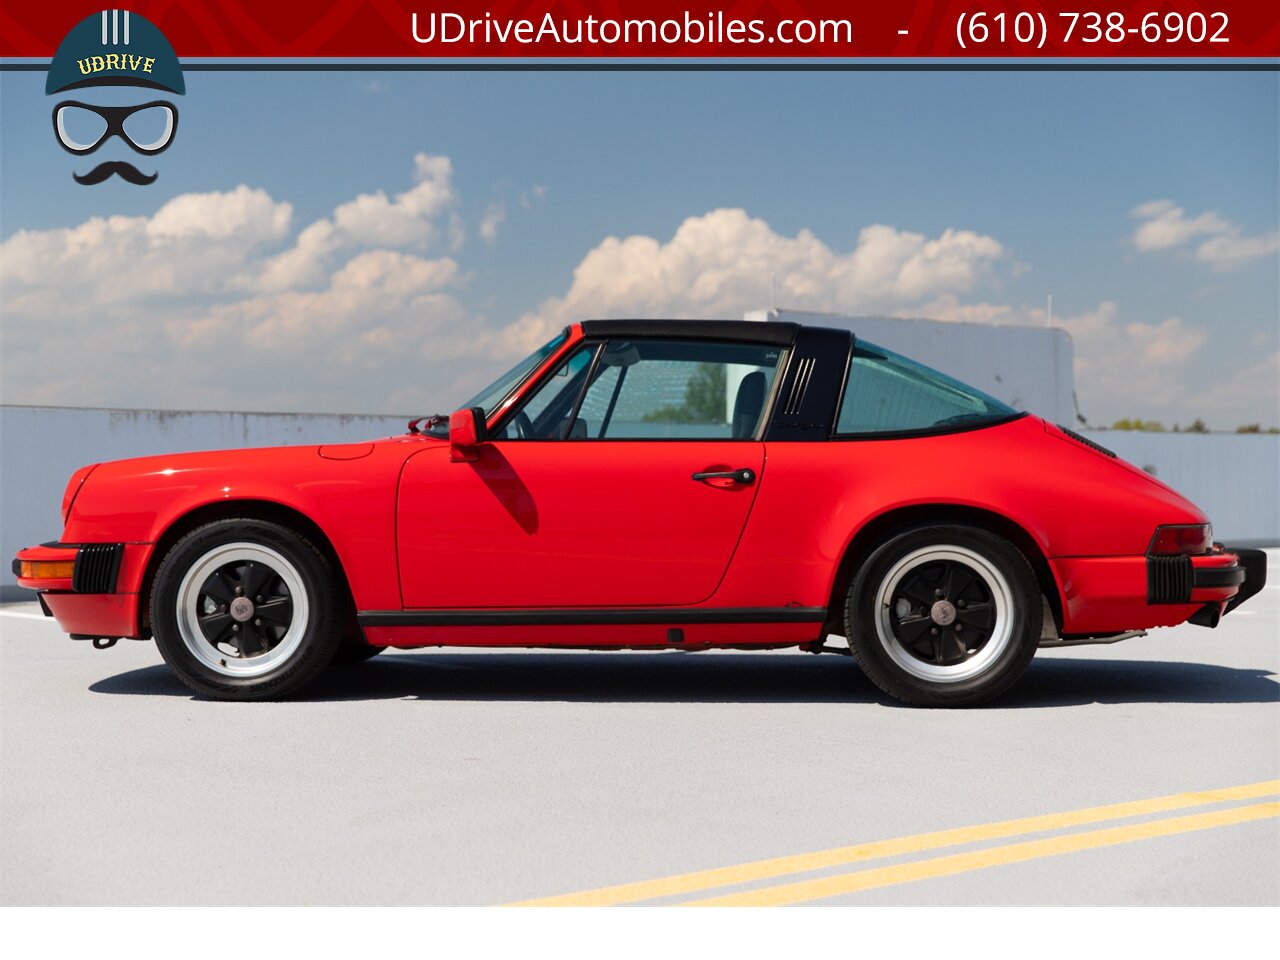 1986 Porsche 911 Carrera Targa 39k Miles Same Owner Since 1988  $23k in Service History Since 2011 - Photo 7 - West Chester, PA 19382